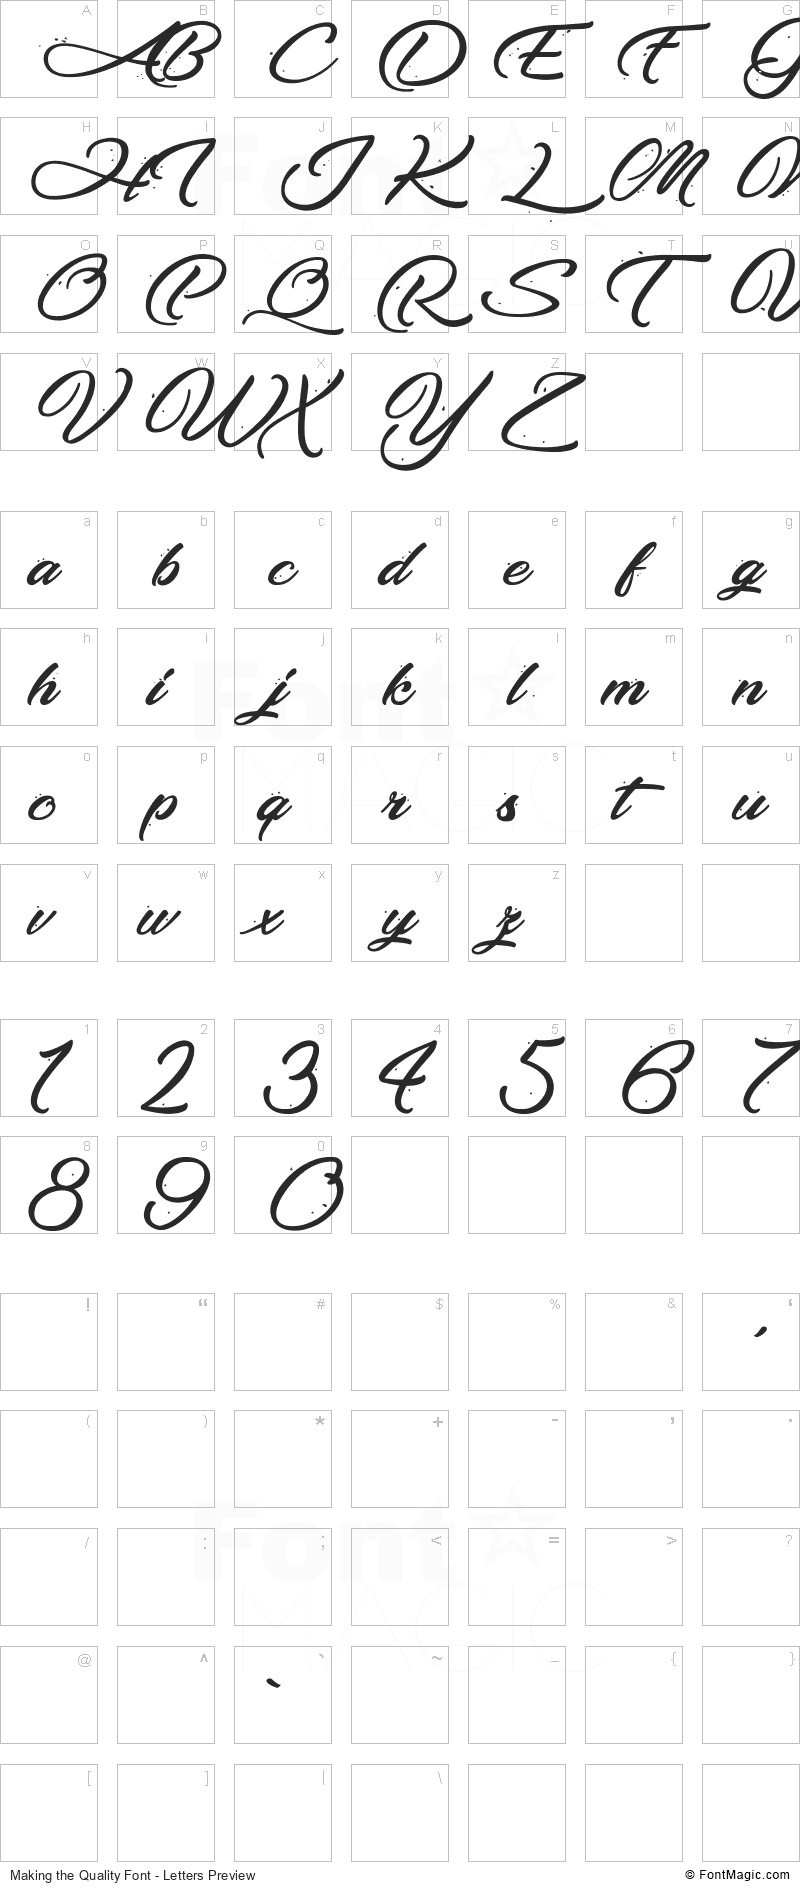 Making the Quality Font - All Latters Preview Chart